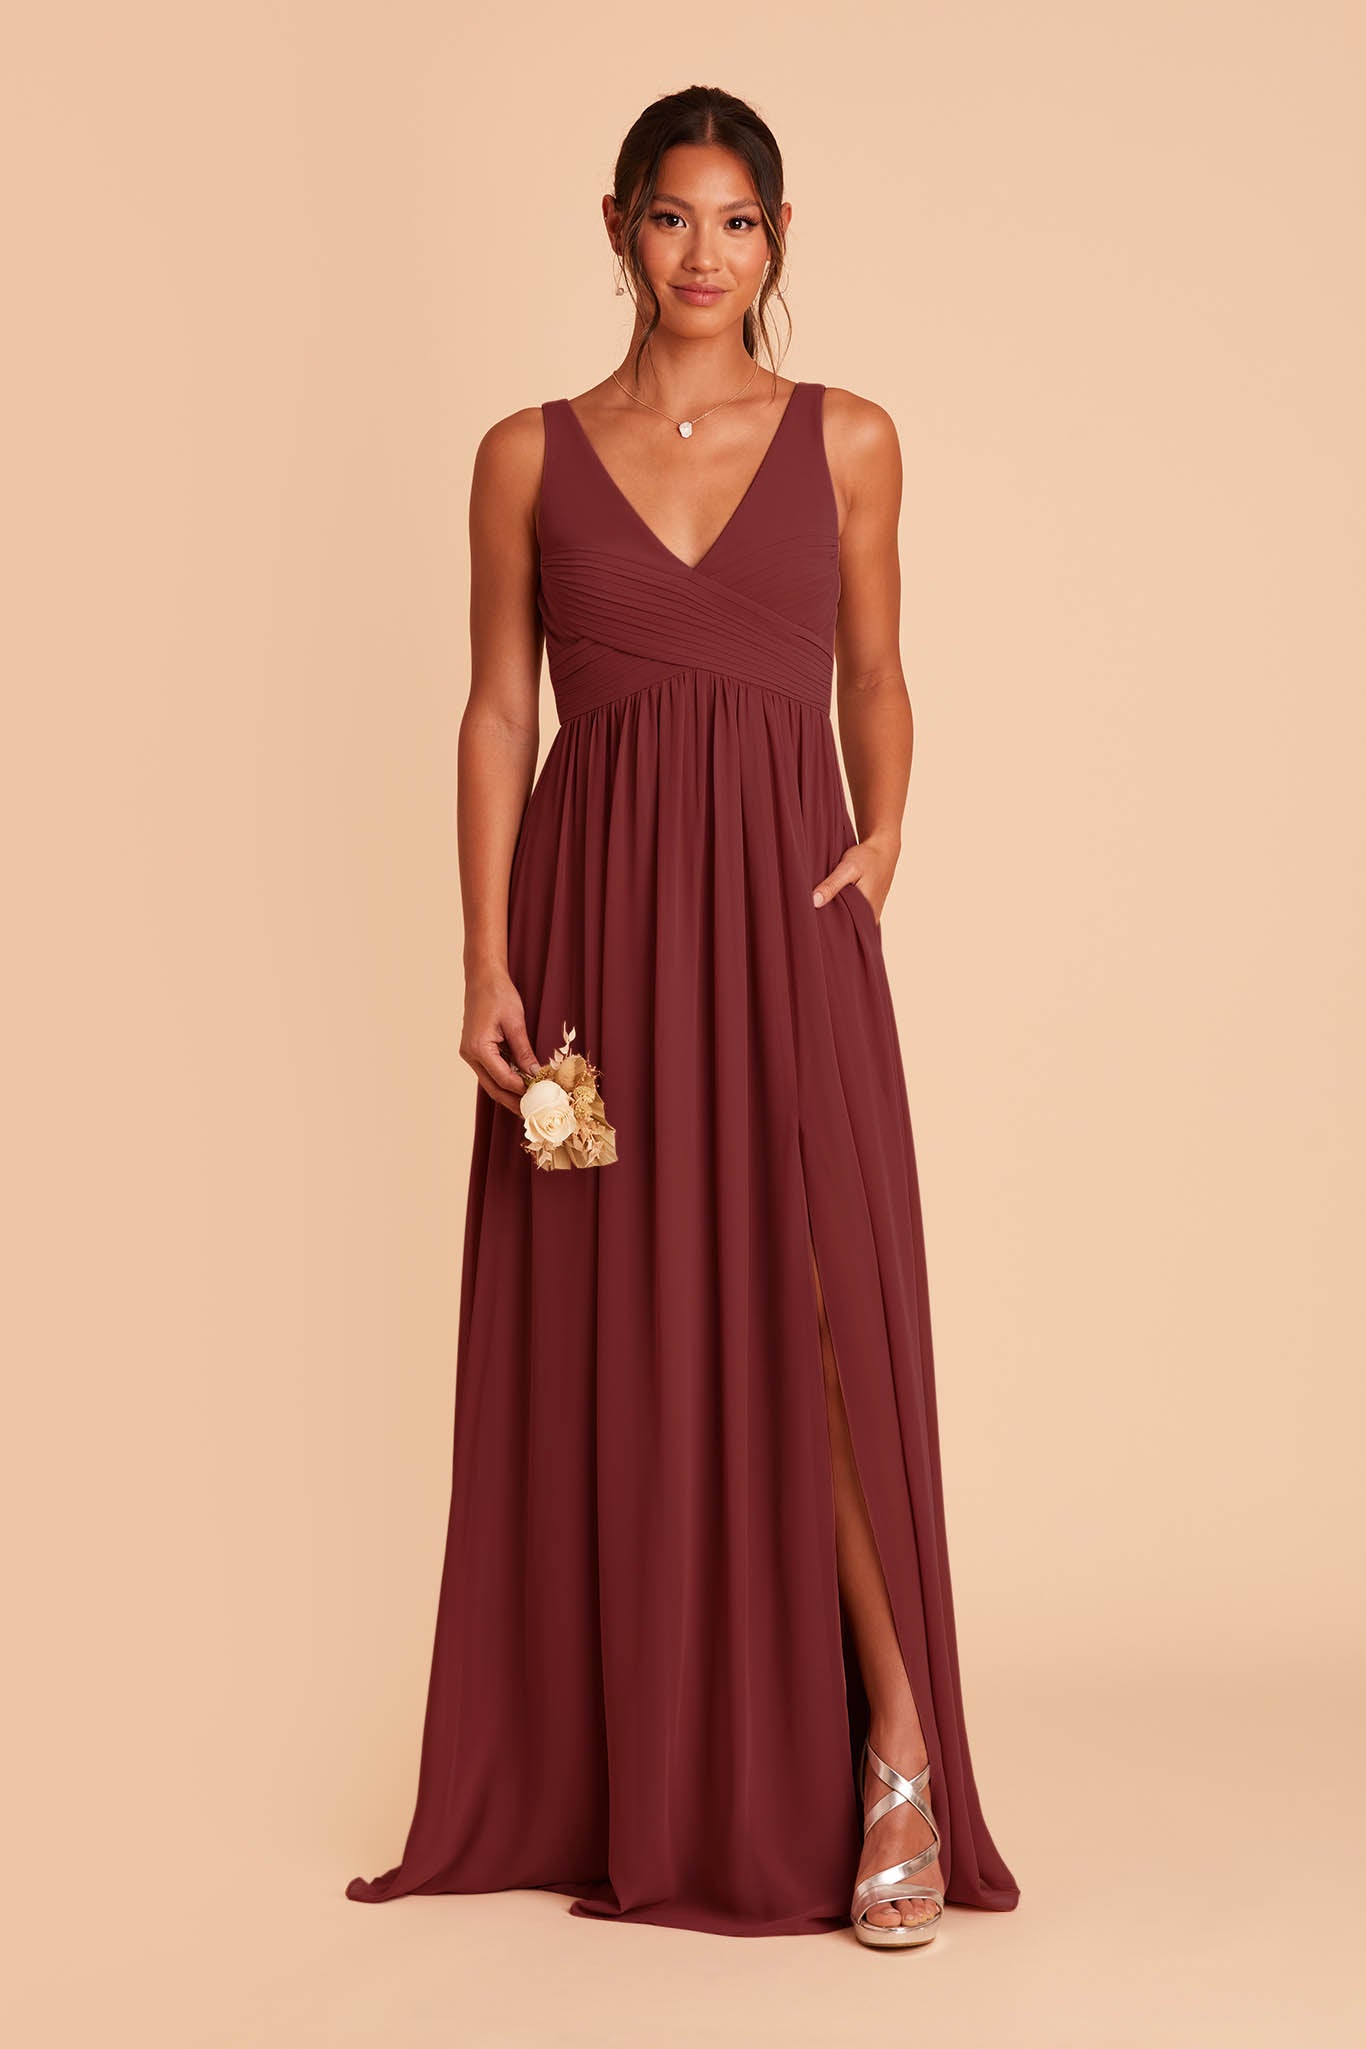 Rosewood Laurie Empire Dress by Birdy Grey